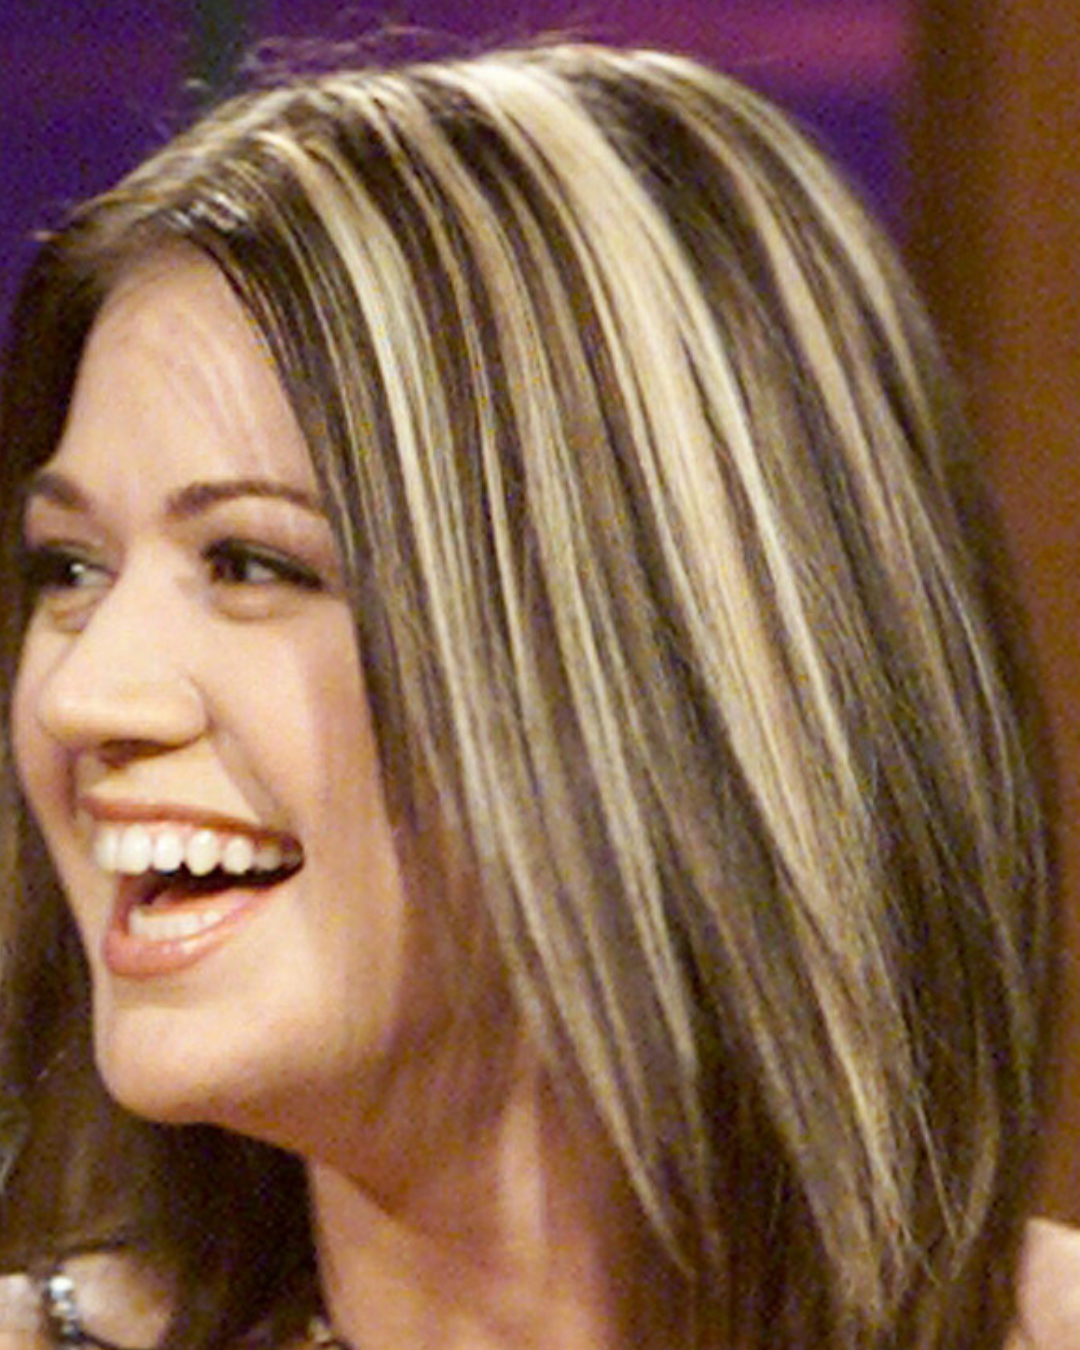 A close side angle of Kelly Clarkson showing her chunky highlights and layered hair